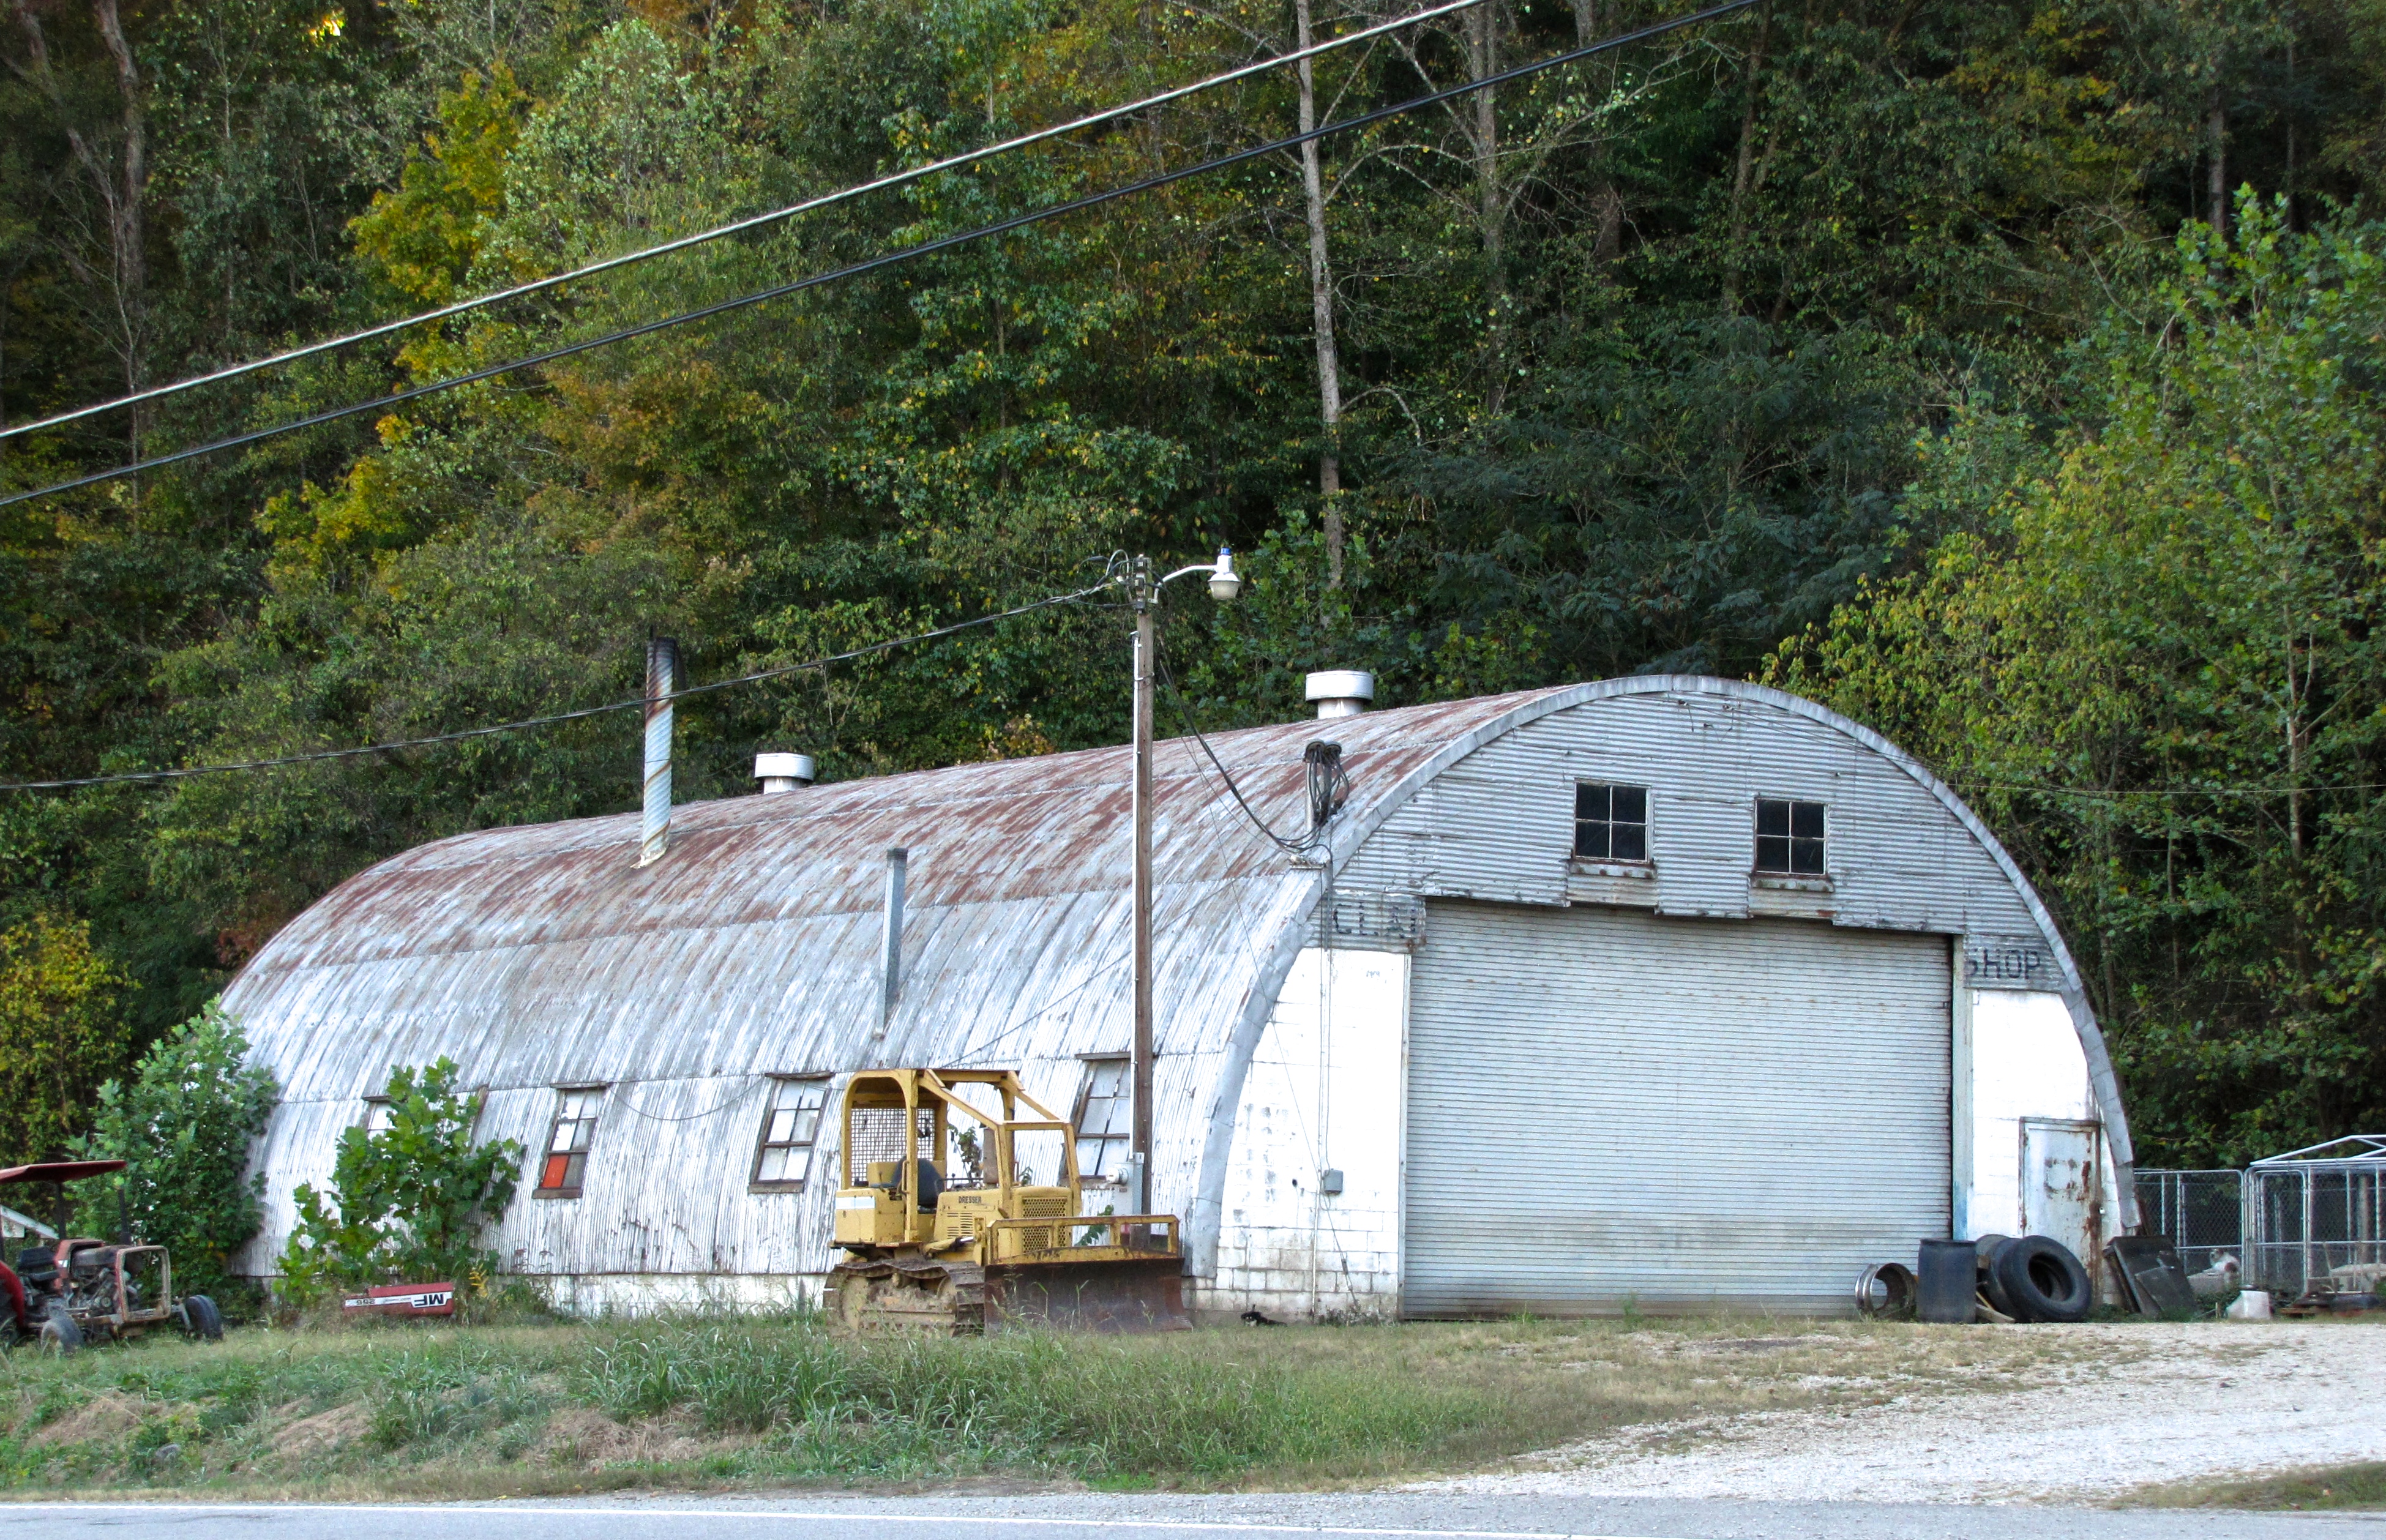 quonset hut in Monmouth Junction, NJ